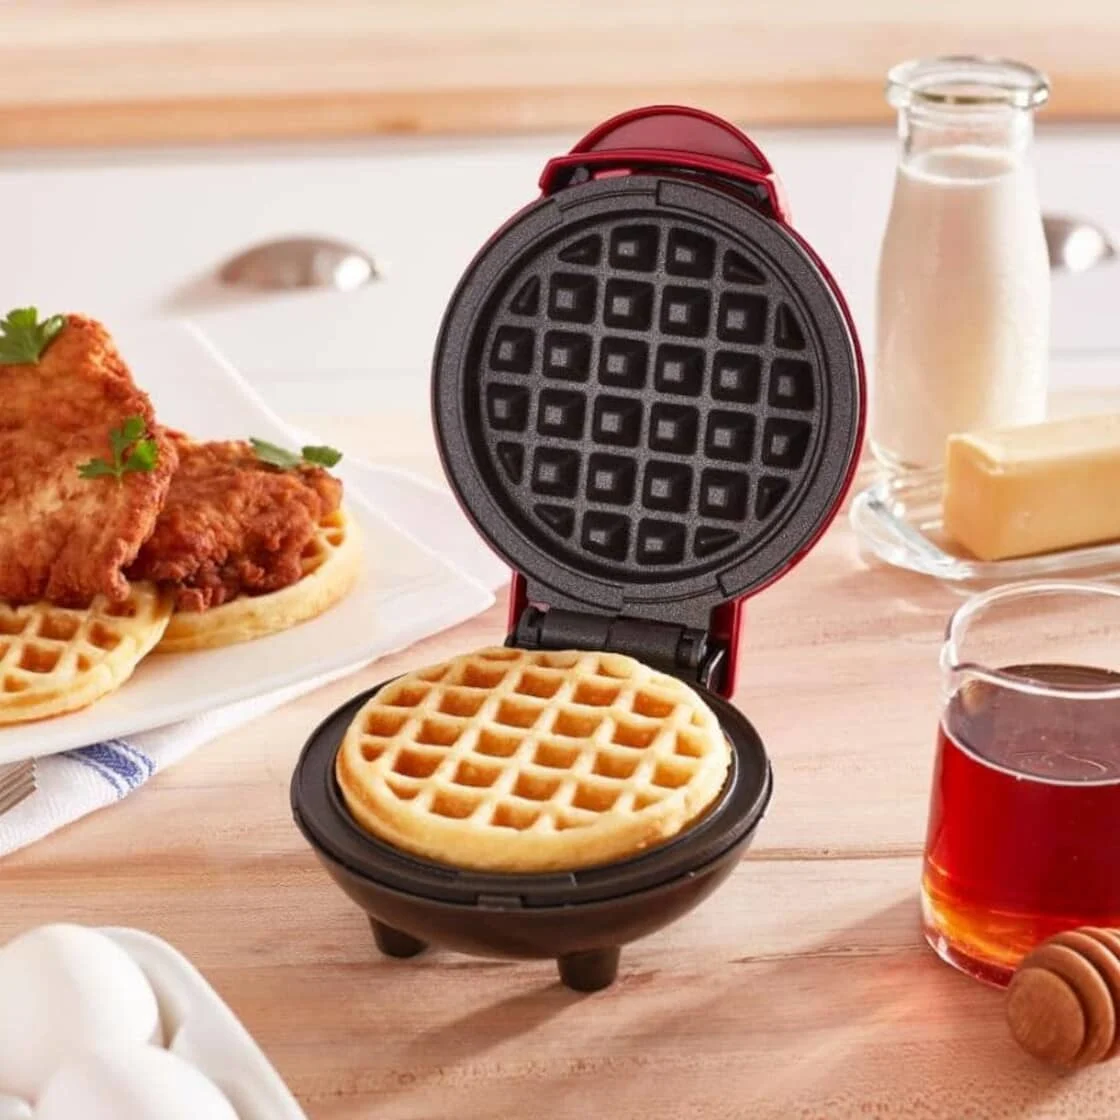 Mini-Griddles & Waffle Makers
